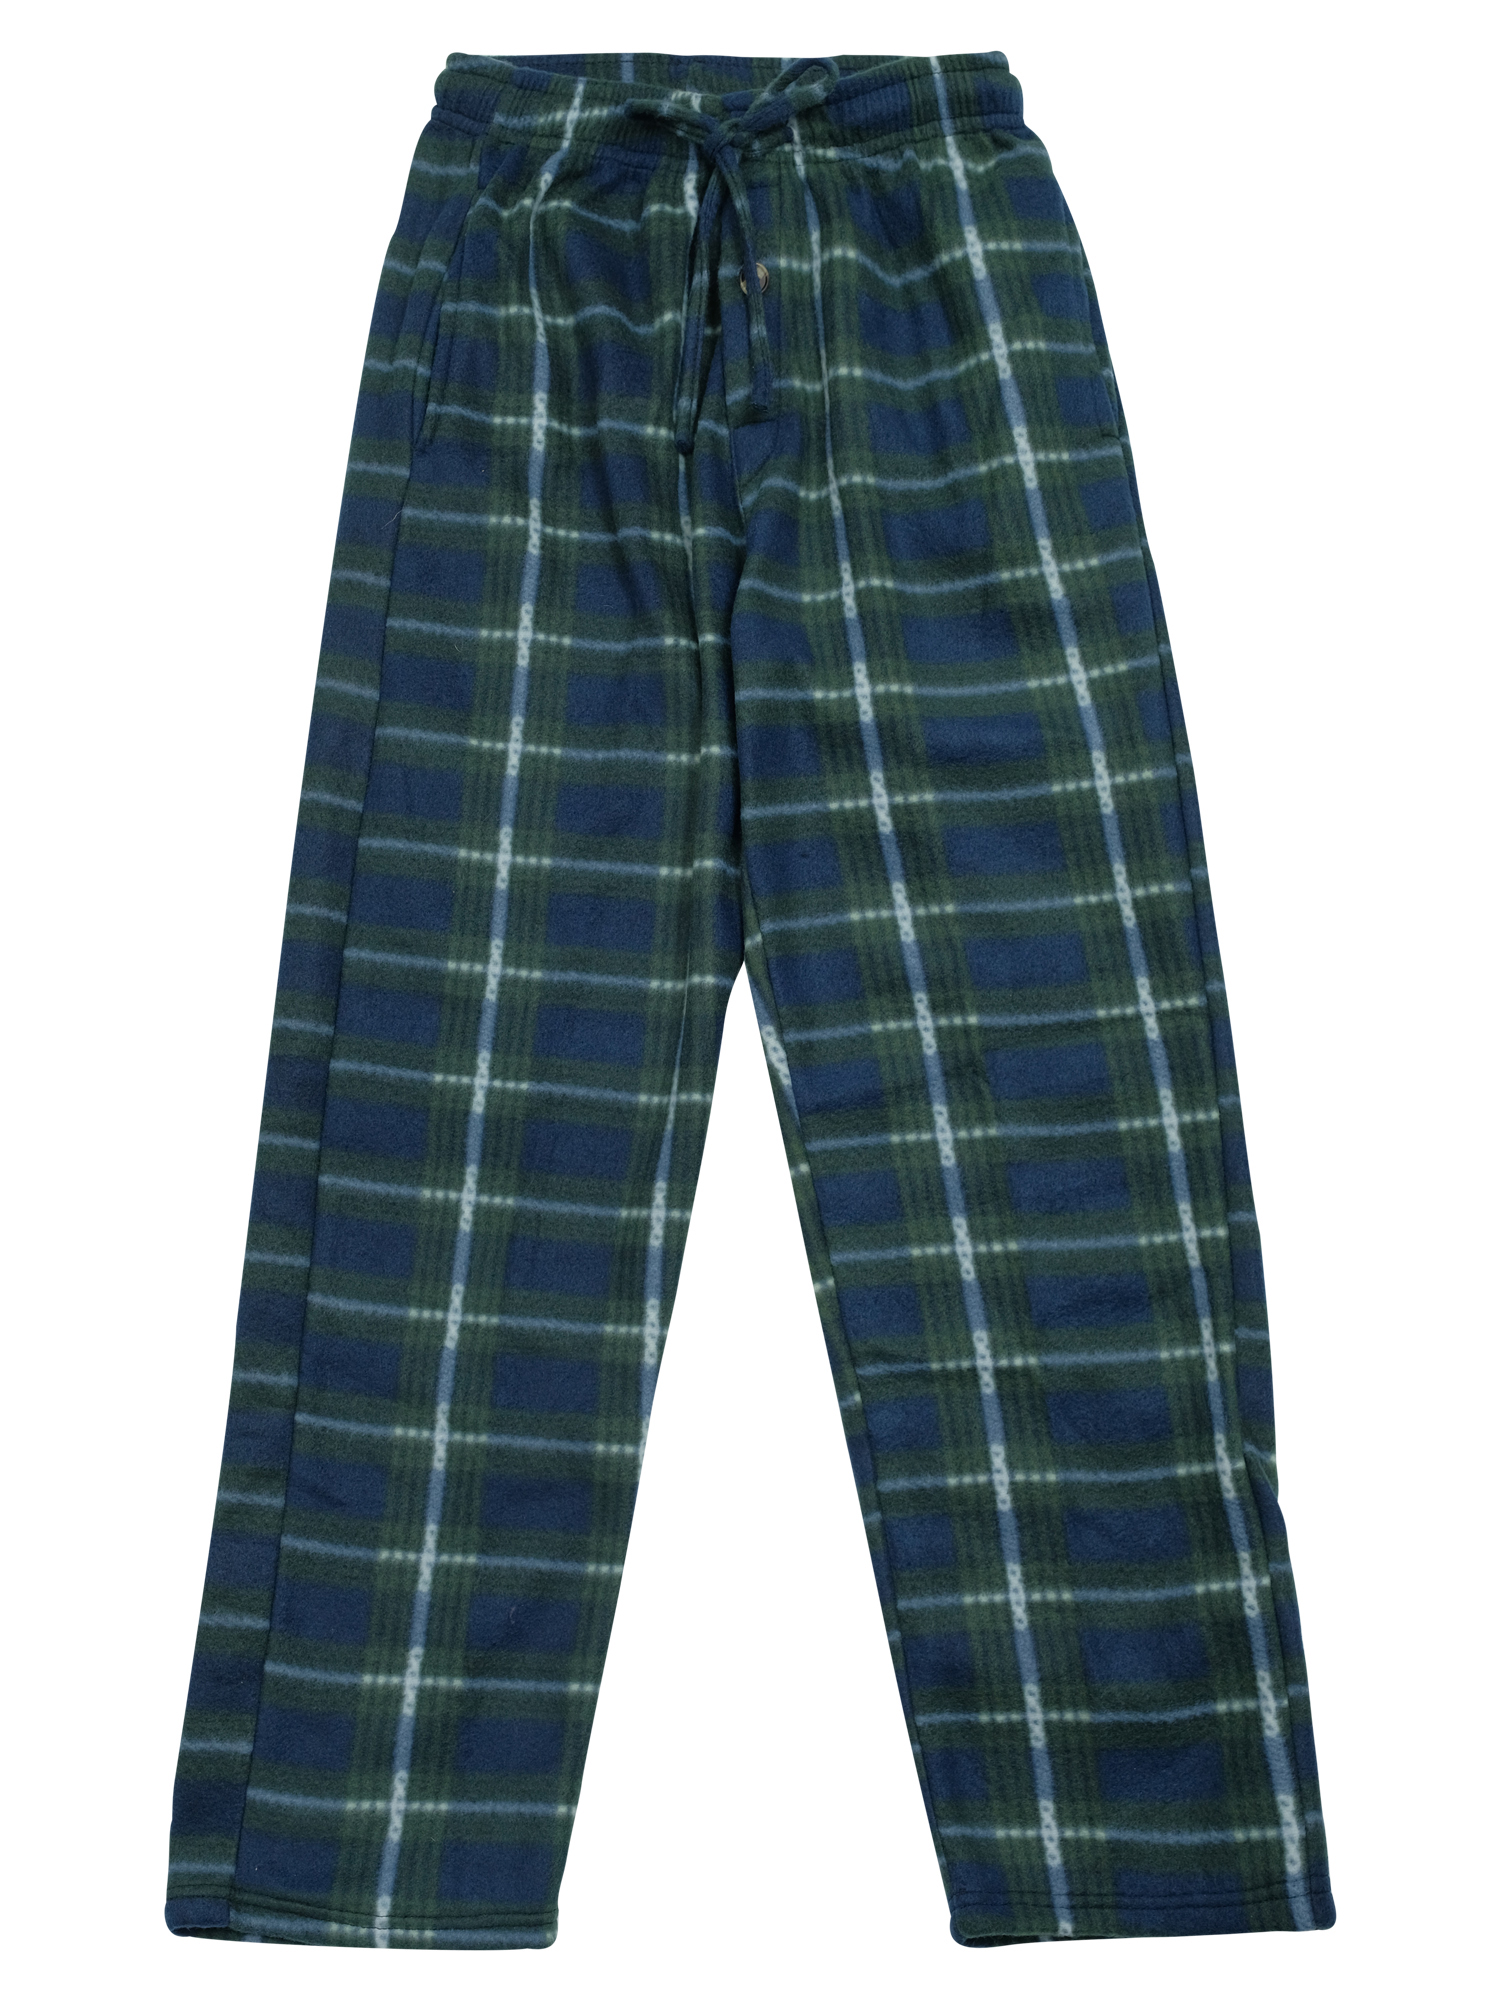 Real Essentials Boys Super-Soft Fleece 3-Pack Pajama Pant Sizes 5-18 - image 6 of 8